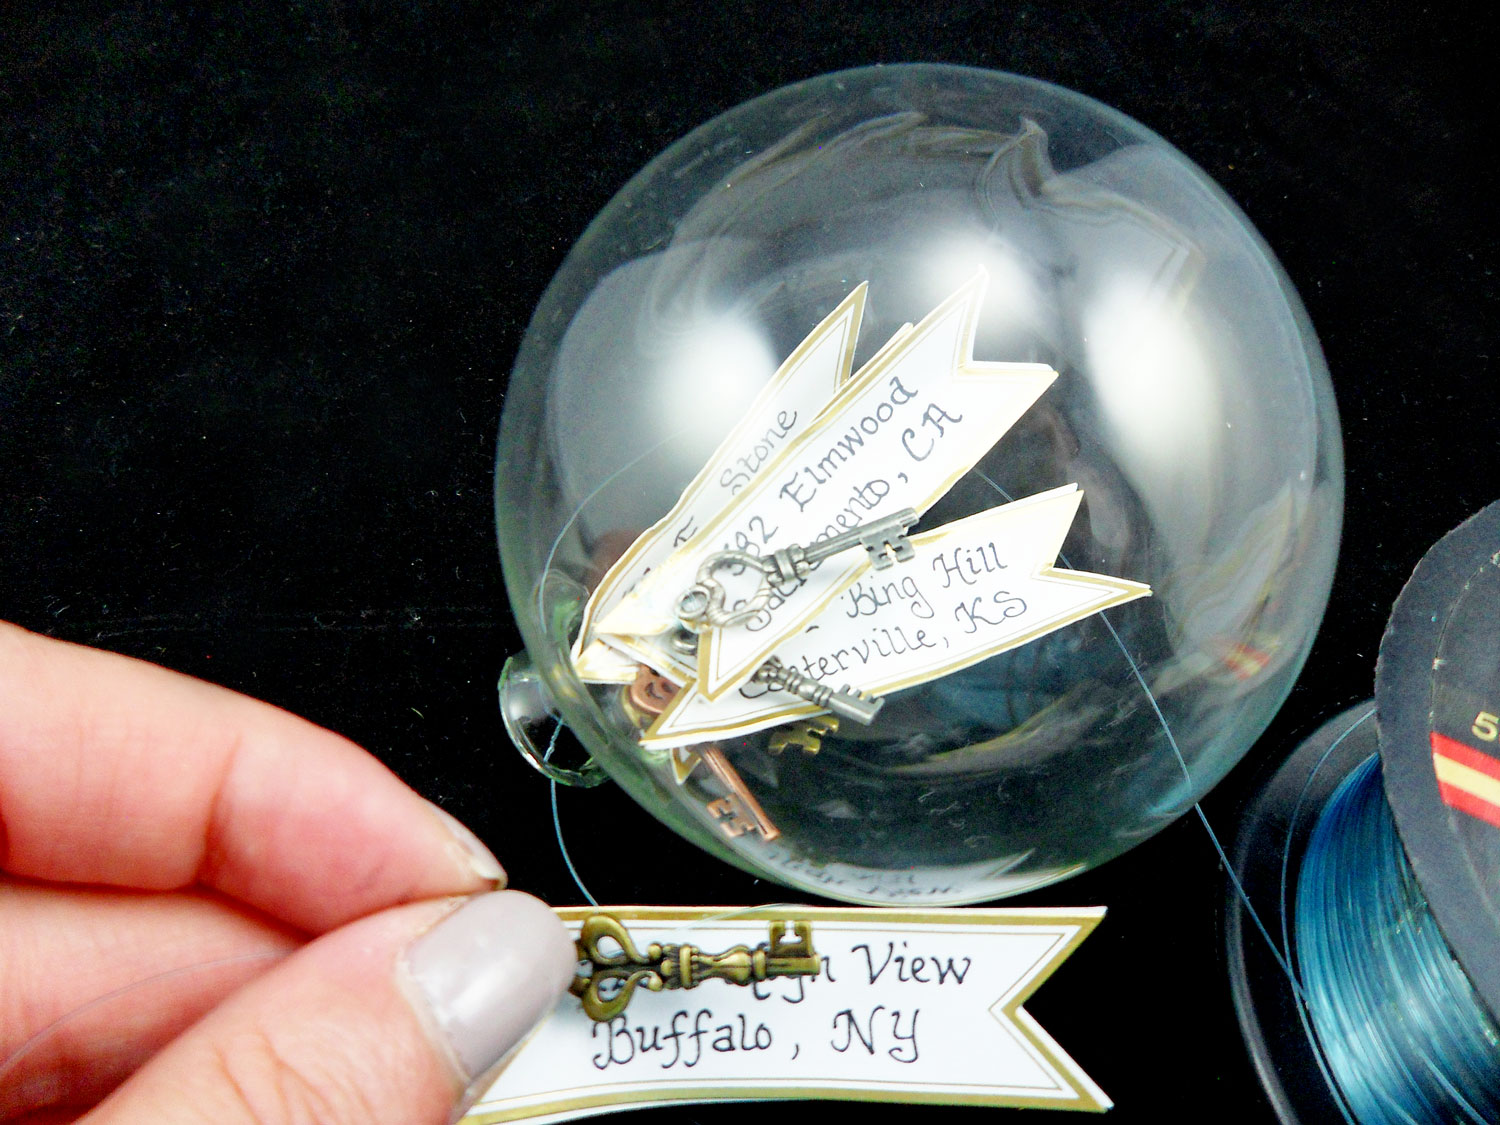 Keys And Address Tags Placed In Clear Ornament Ball | OrnamentShop.com